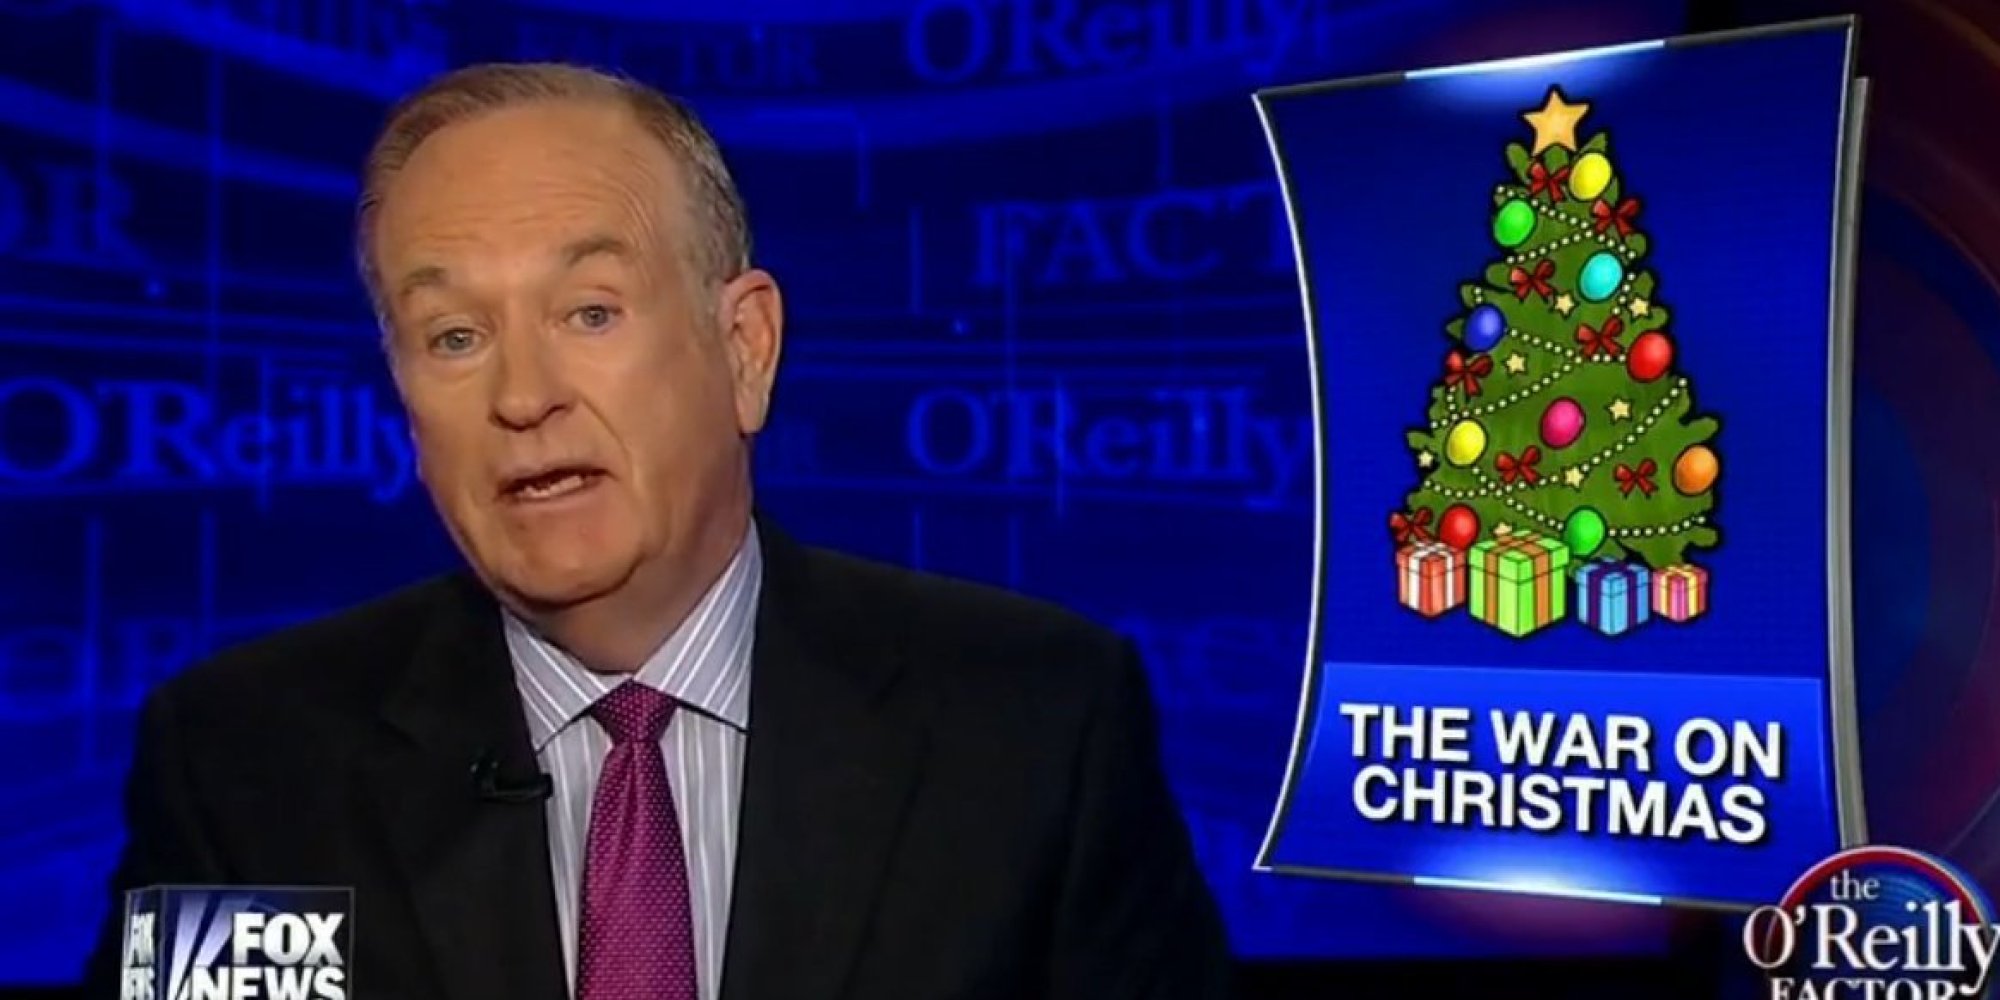 This week, Americas "War On Christmas" reached the nuclear stage.